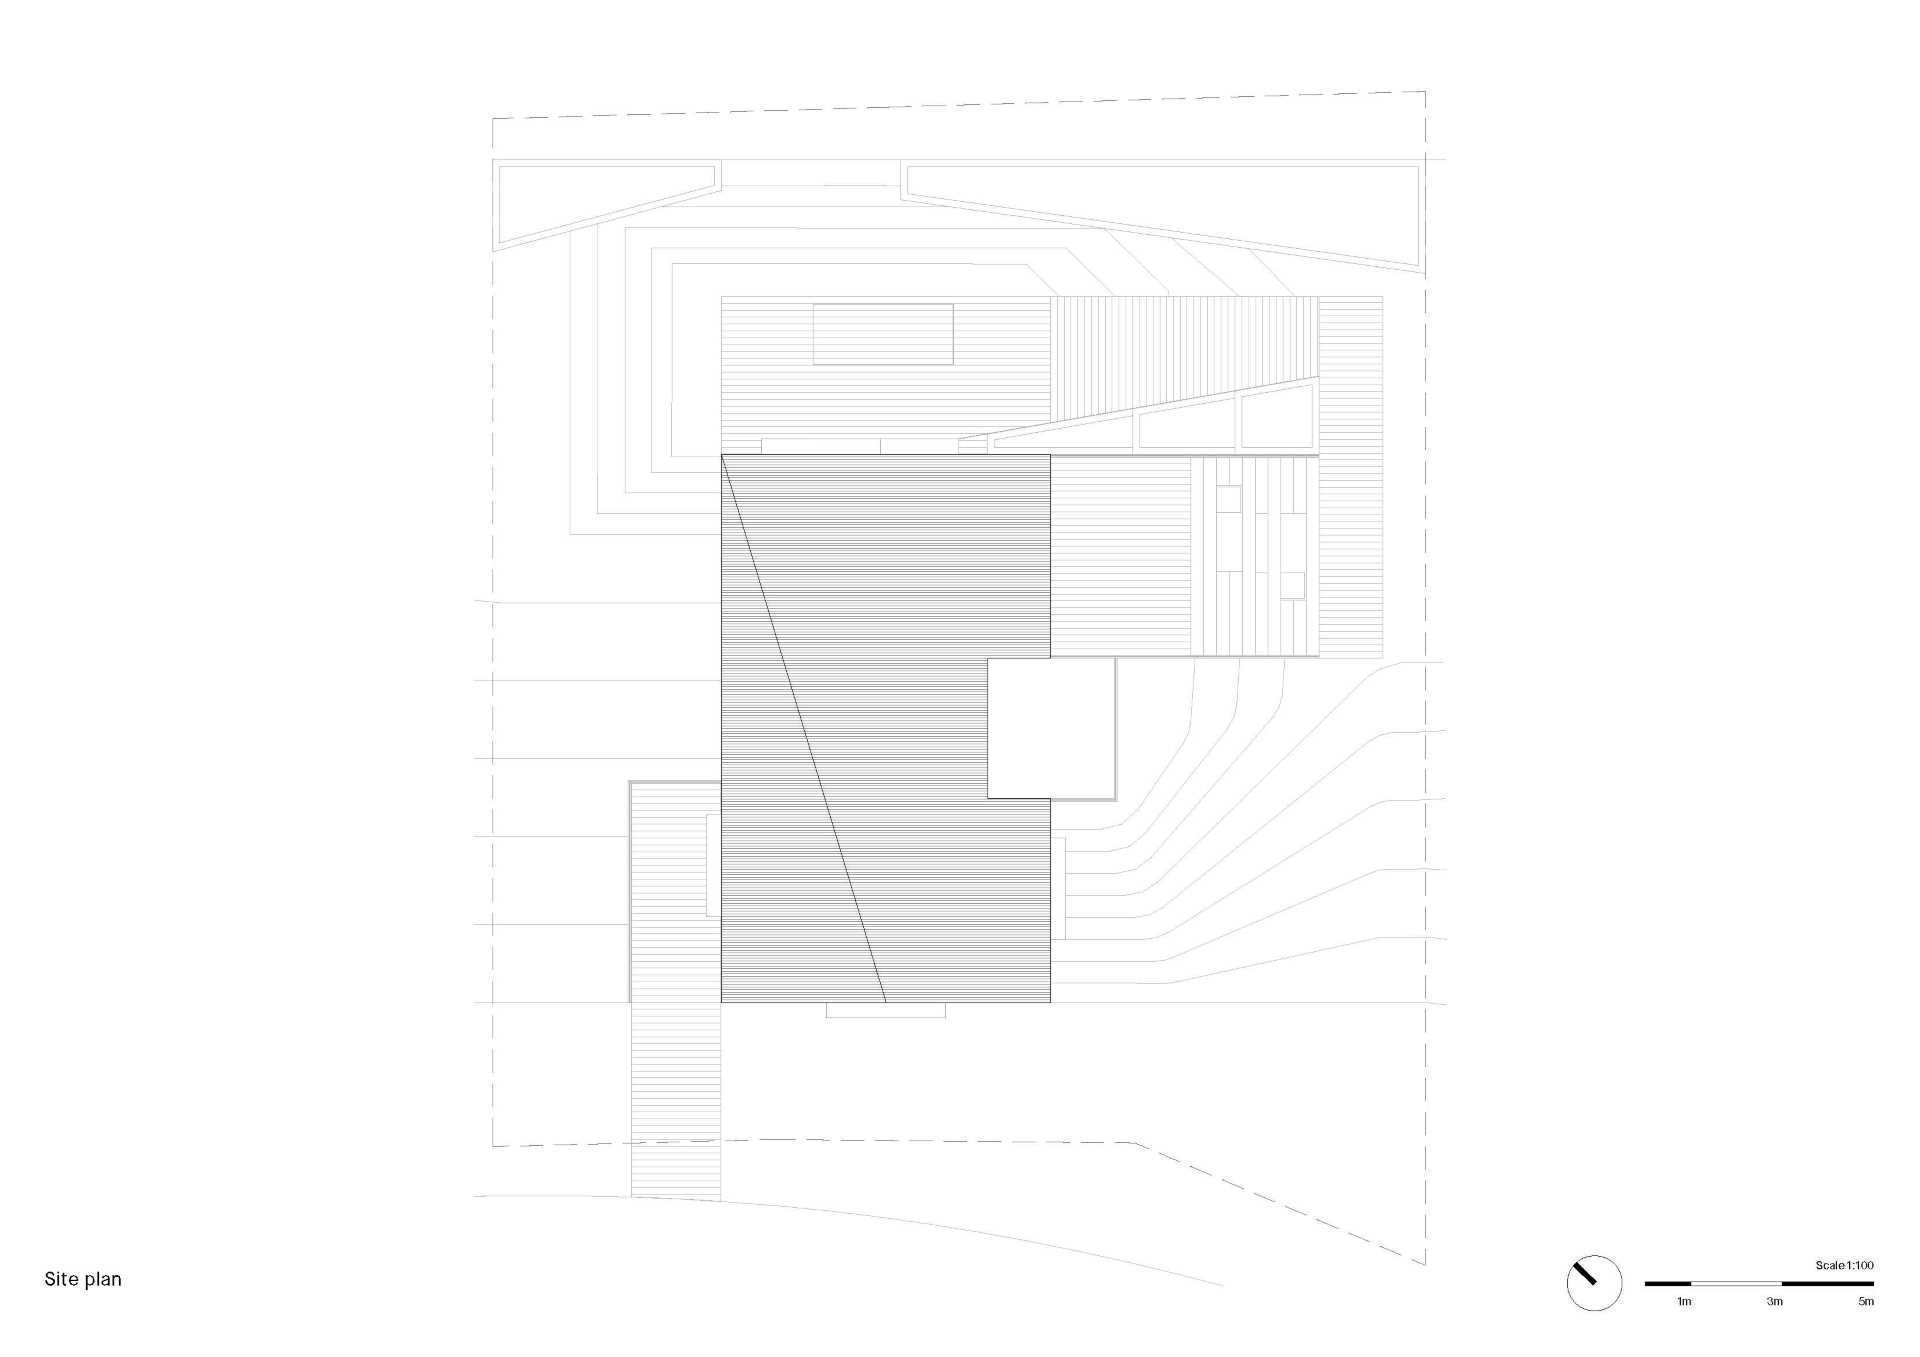 The site plan of a modern house.